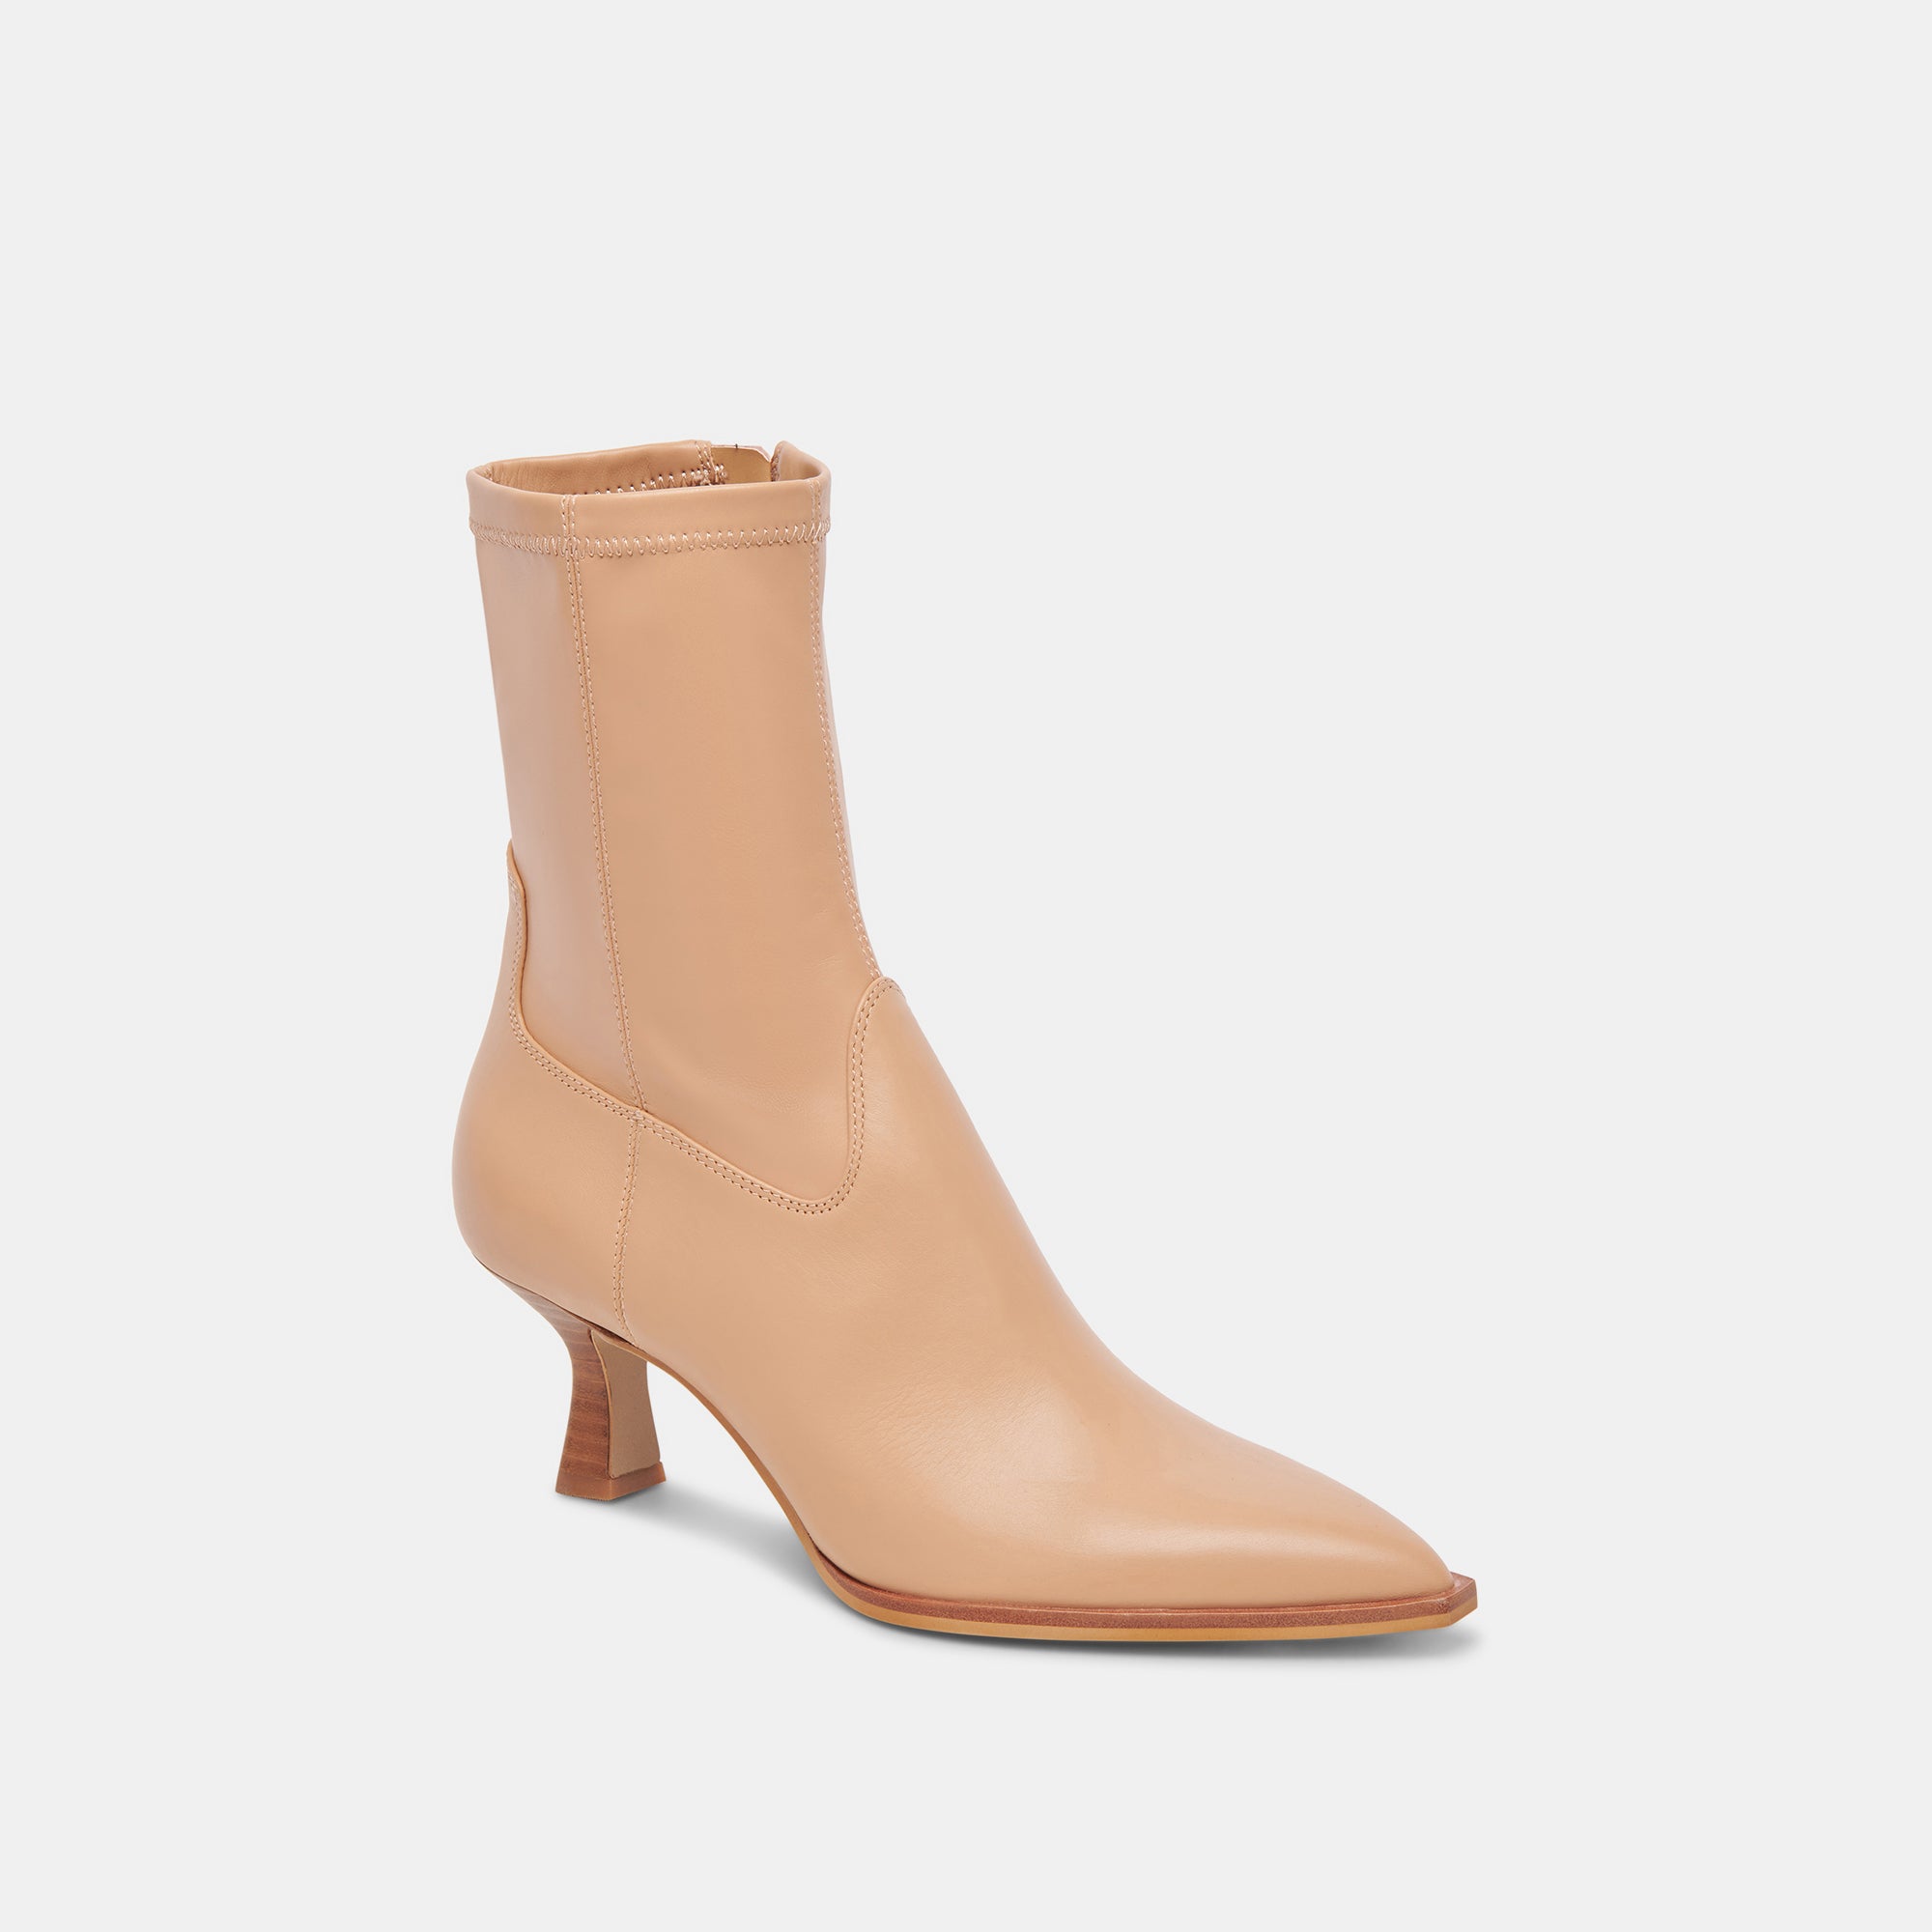 Arya Tan Stella Boots | Rich Leather Tan Stella Boots with Skinny Heel ...